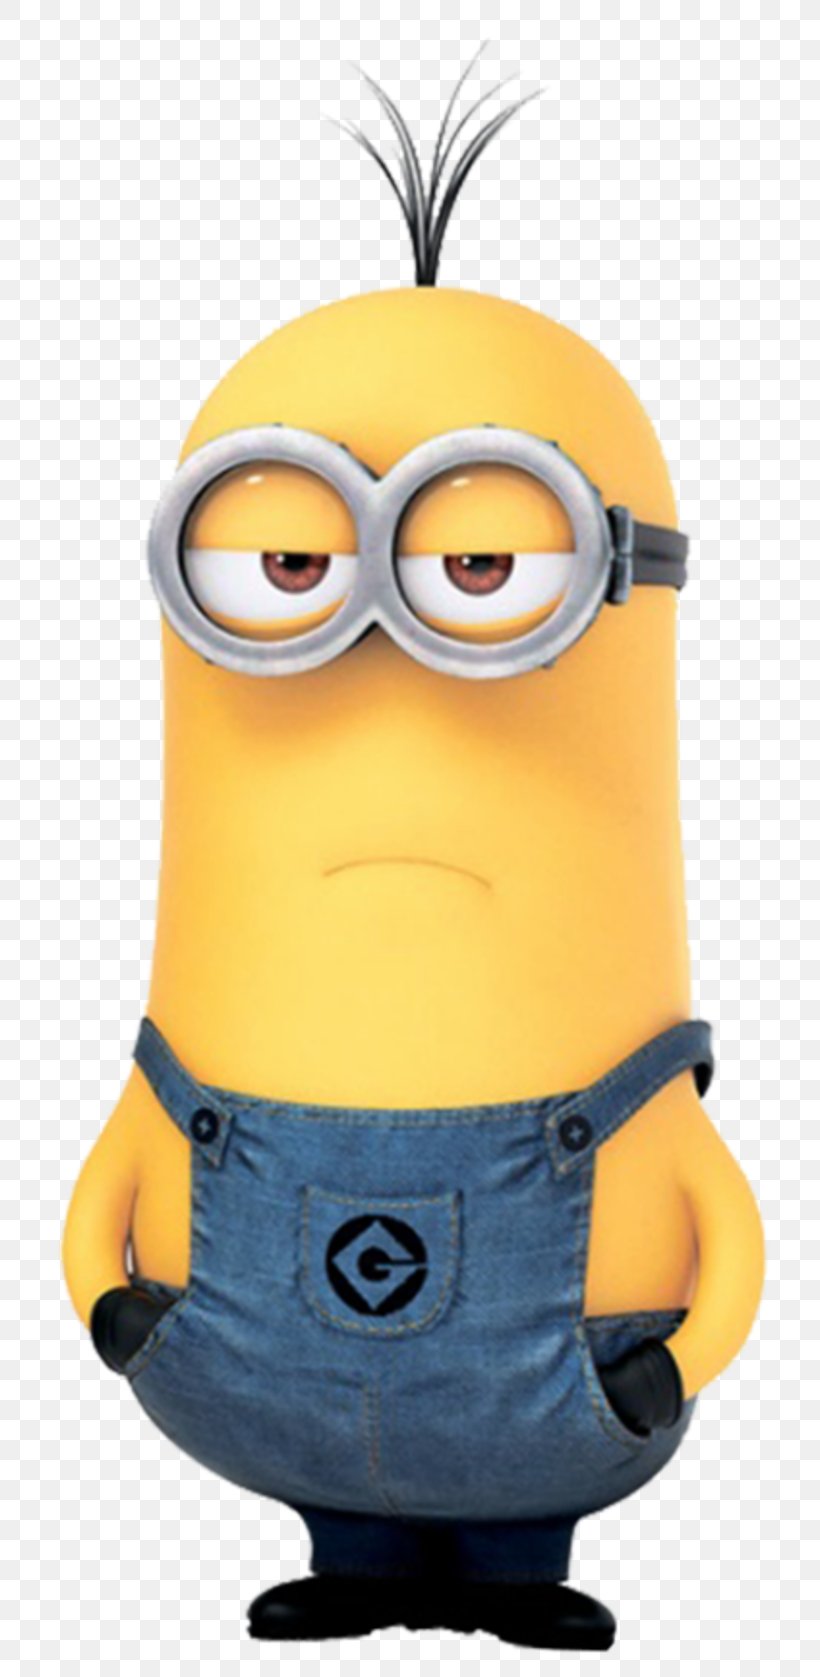 Kevin The Minion Humour Joke Film Quotation, PNG 